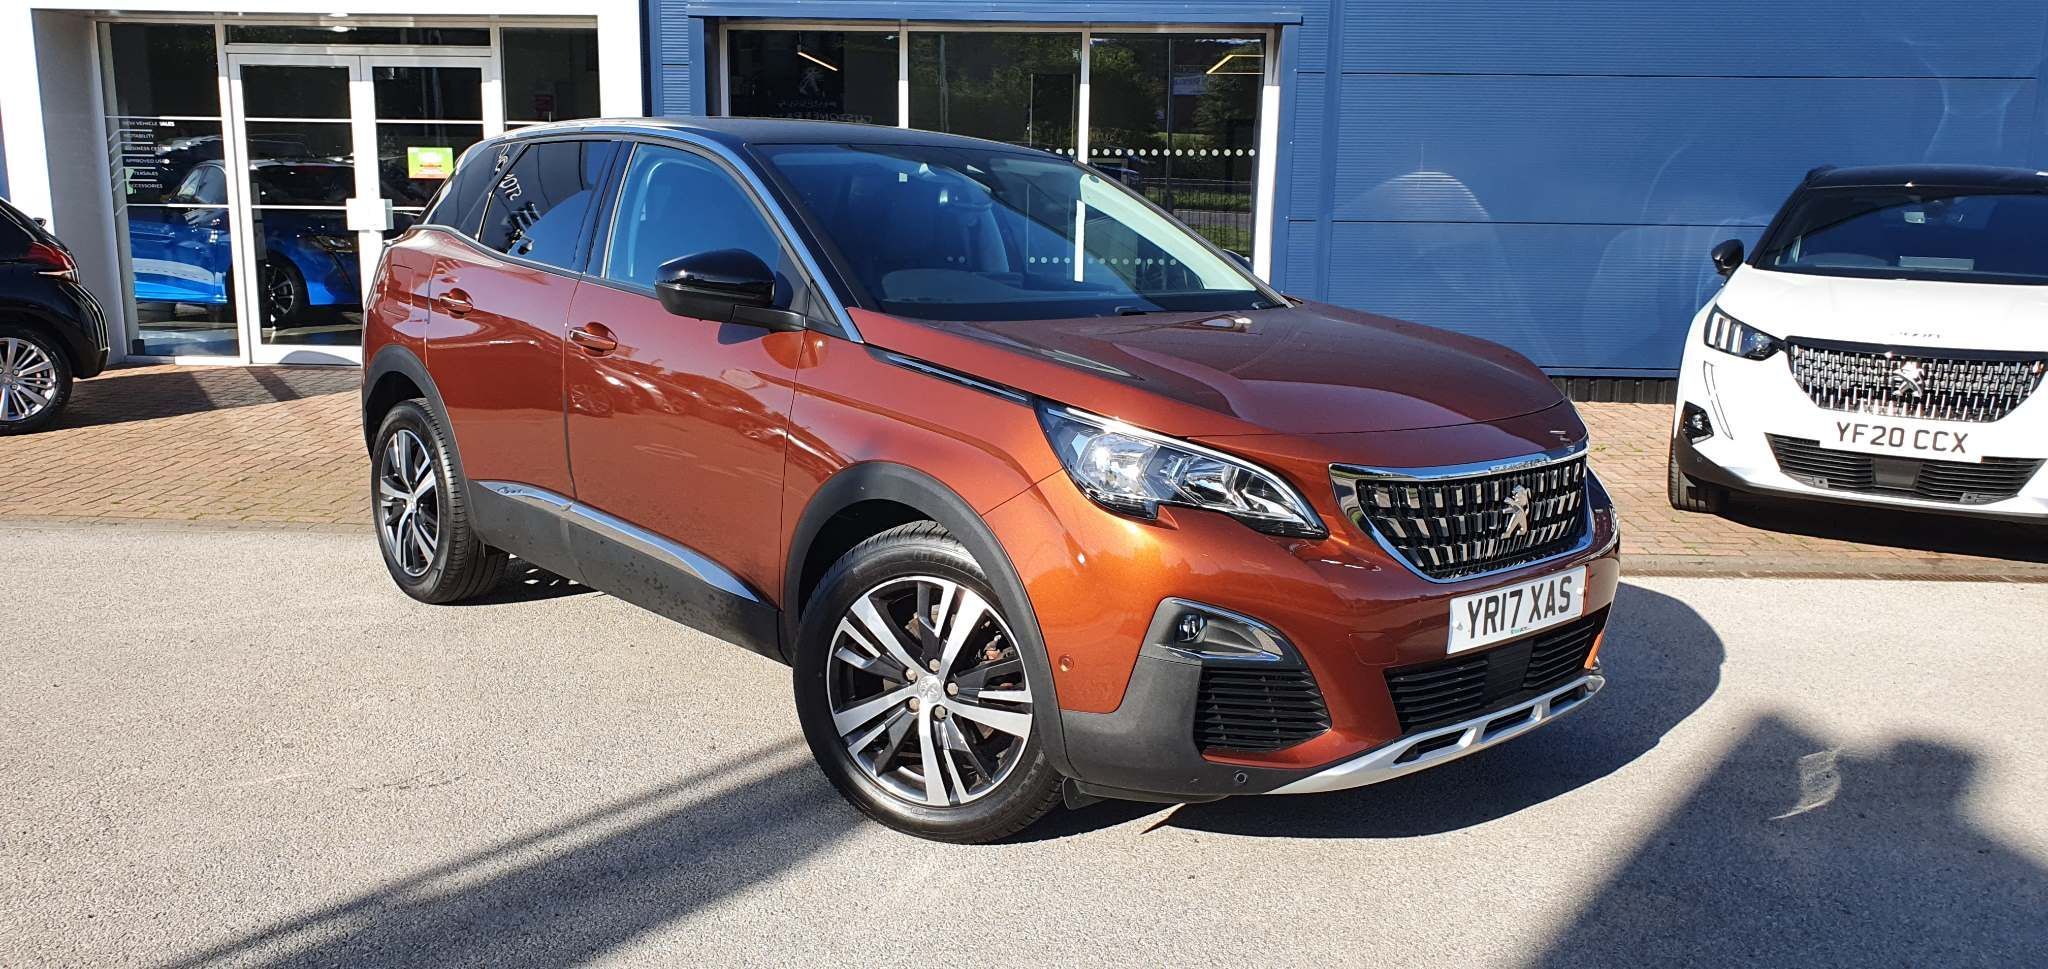 Used Peugeot 3008 SUV 1.2 Puretech Allure 5dr (YR17XAS